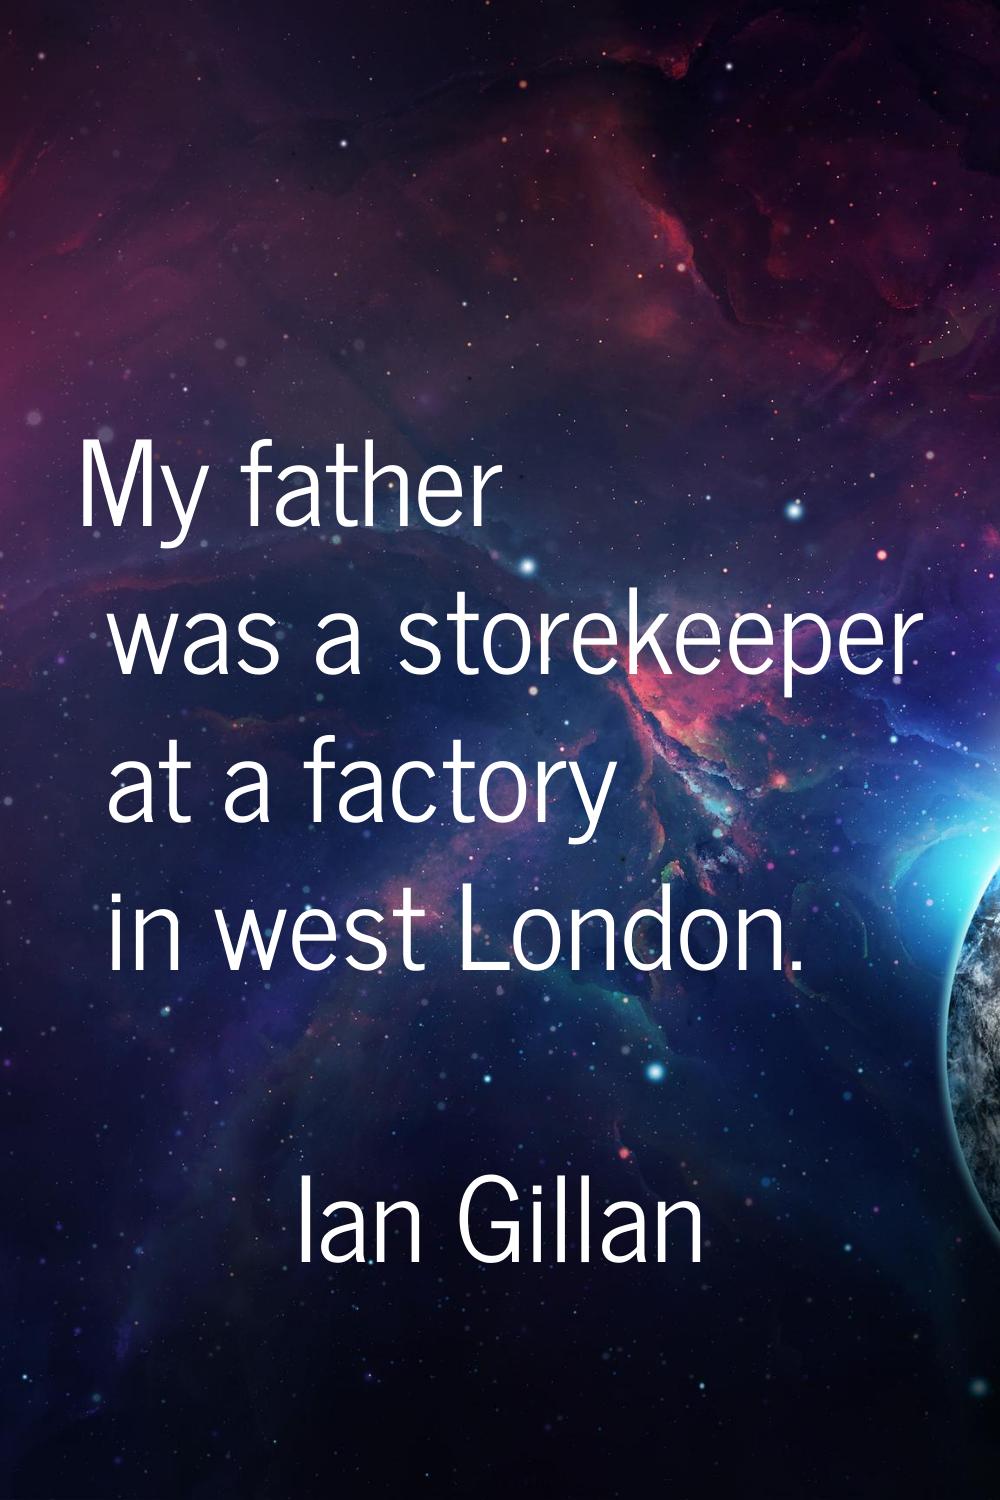 My father was a storekeeper at a factory in west London.